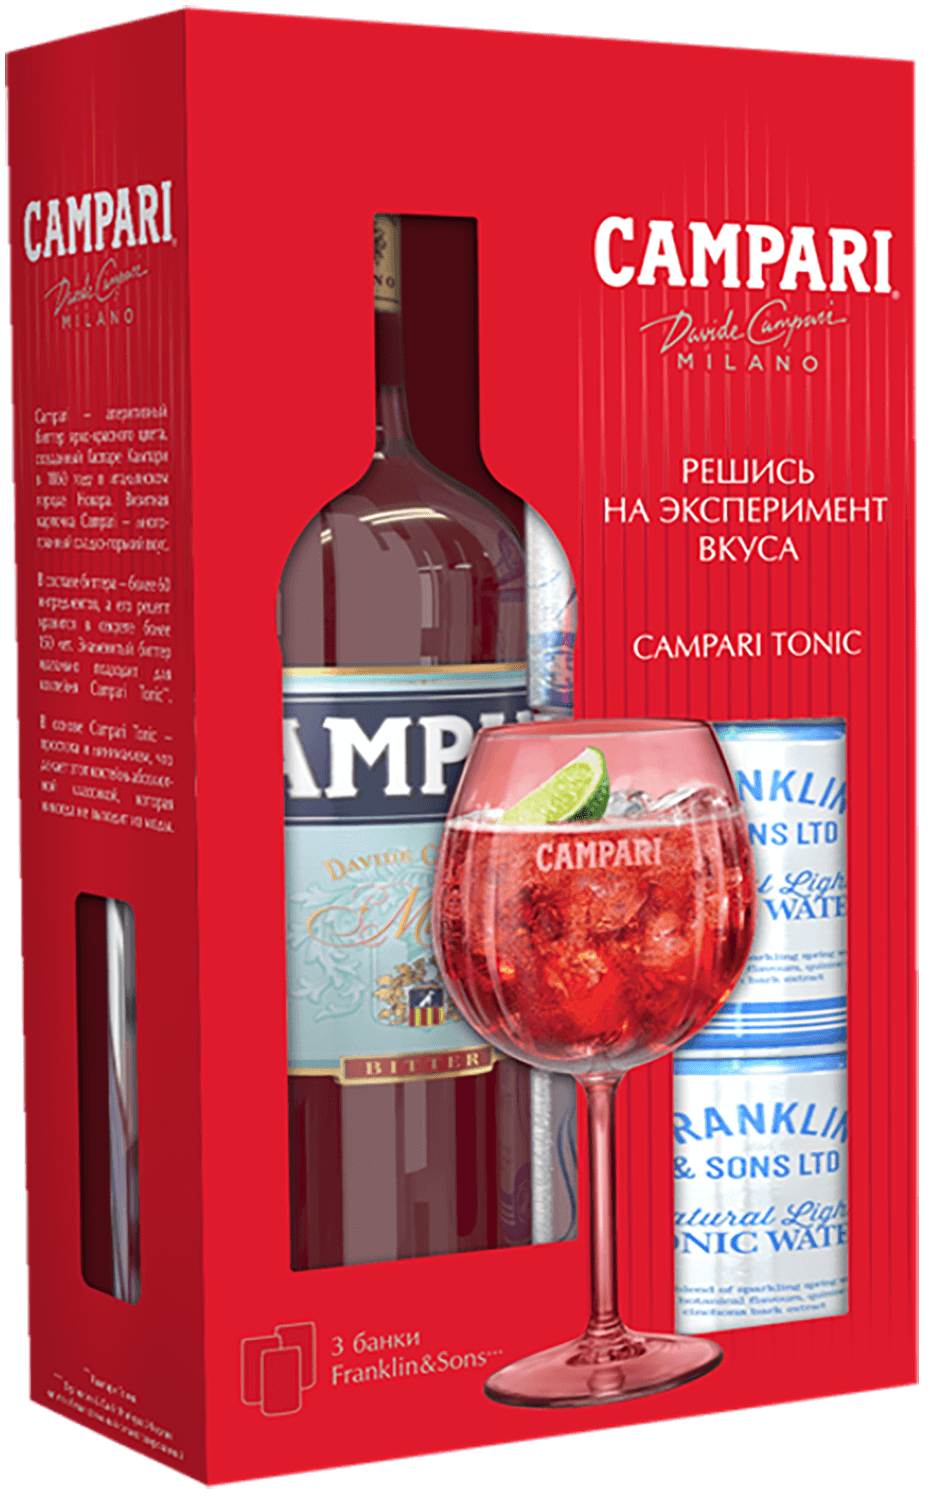 franklin and sons mallorcan tonic water Campari (gift box with 3×150ml Franklin and Sons Natural Indian Tonic Water)